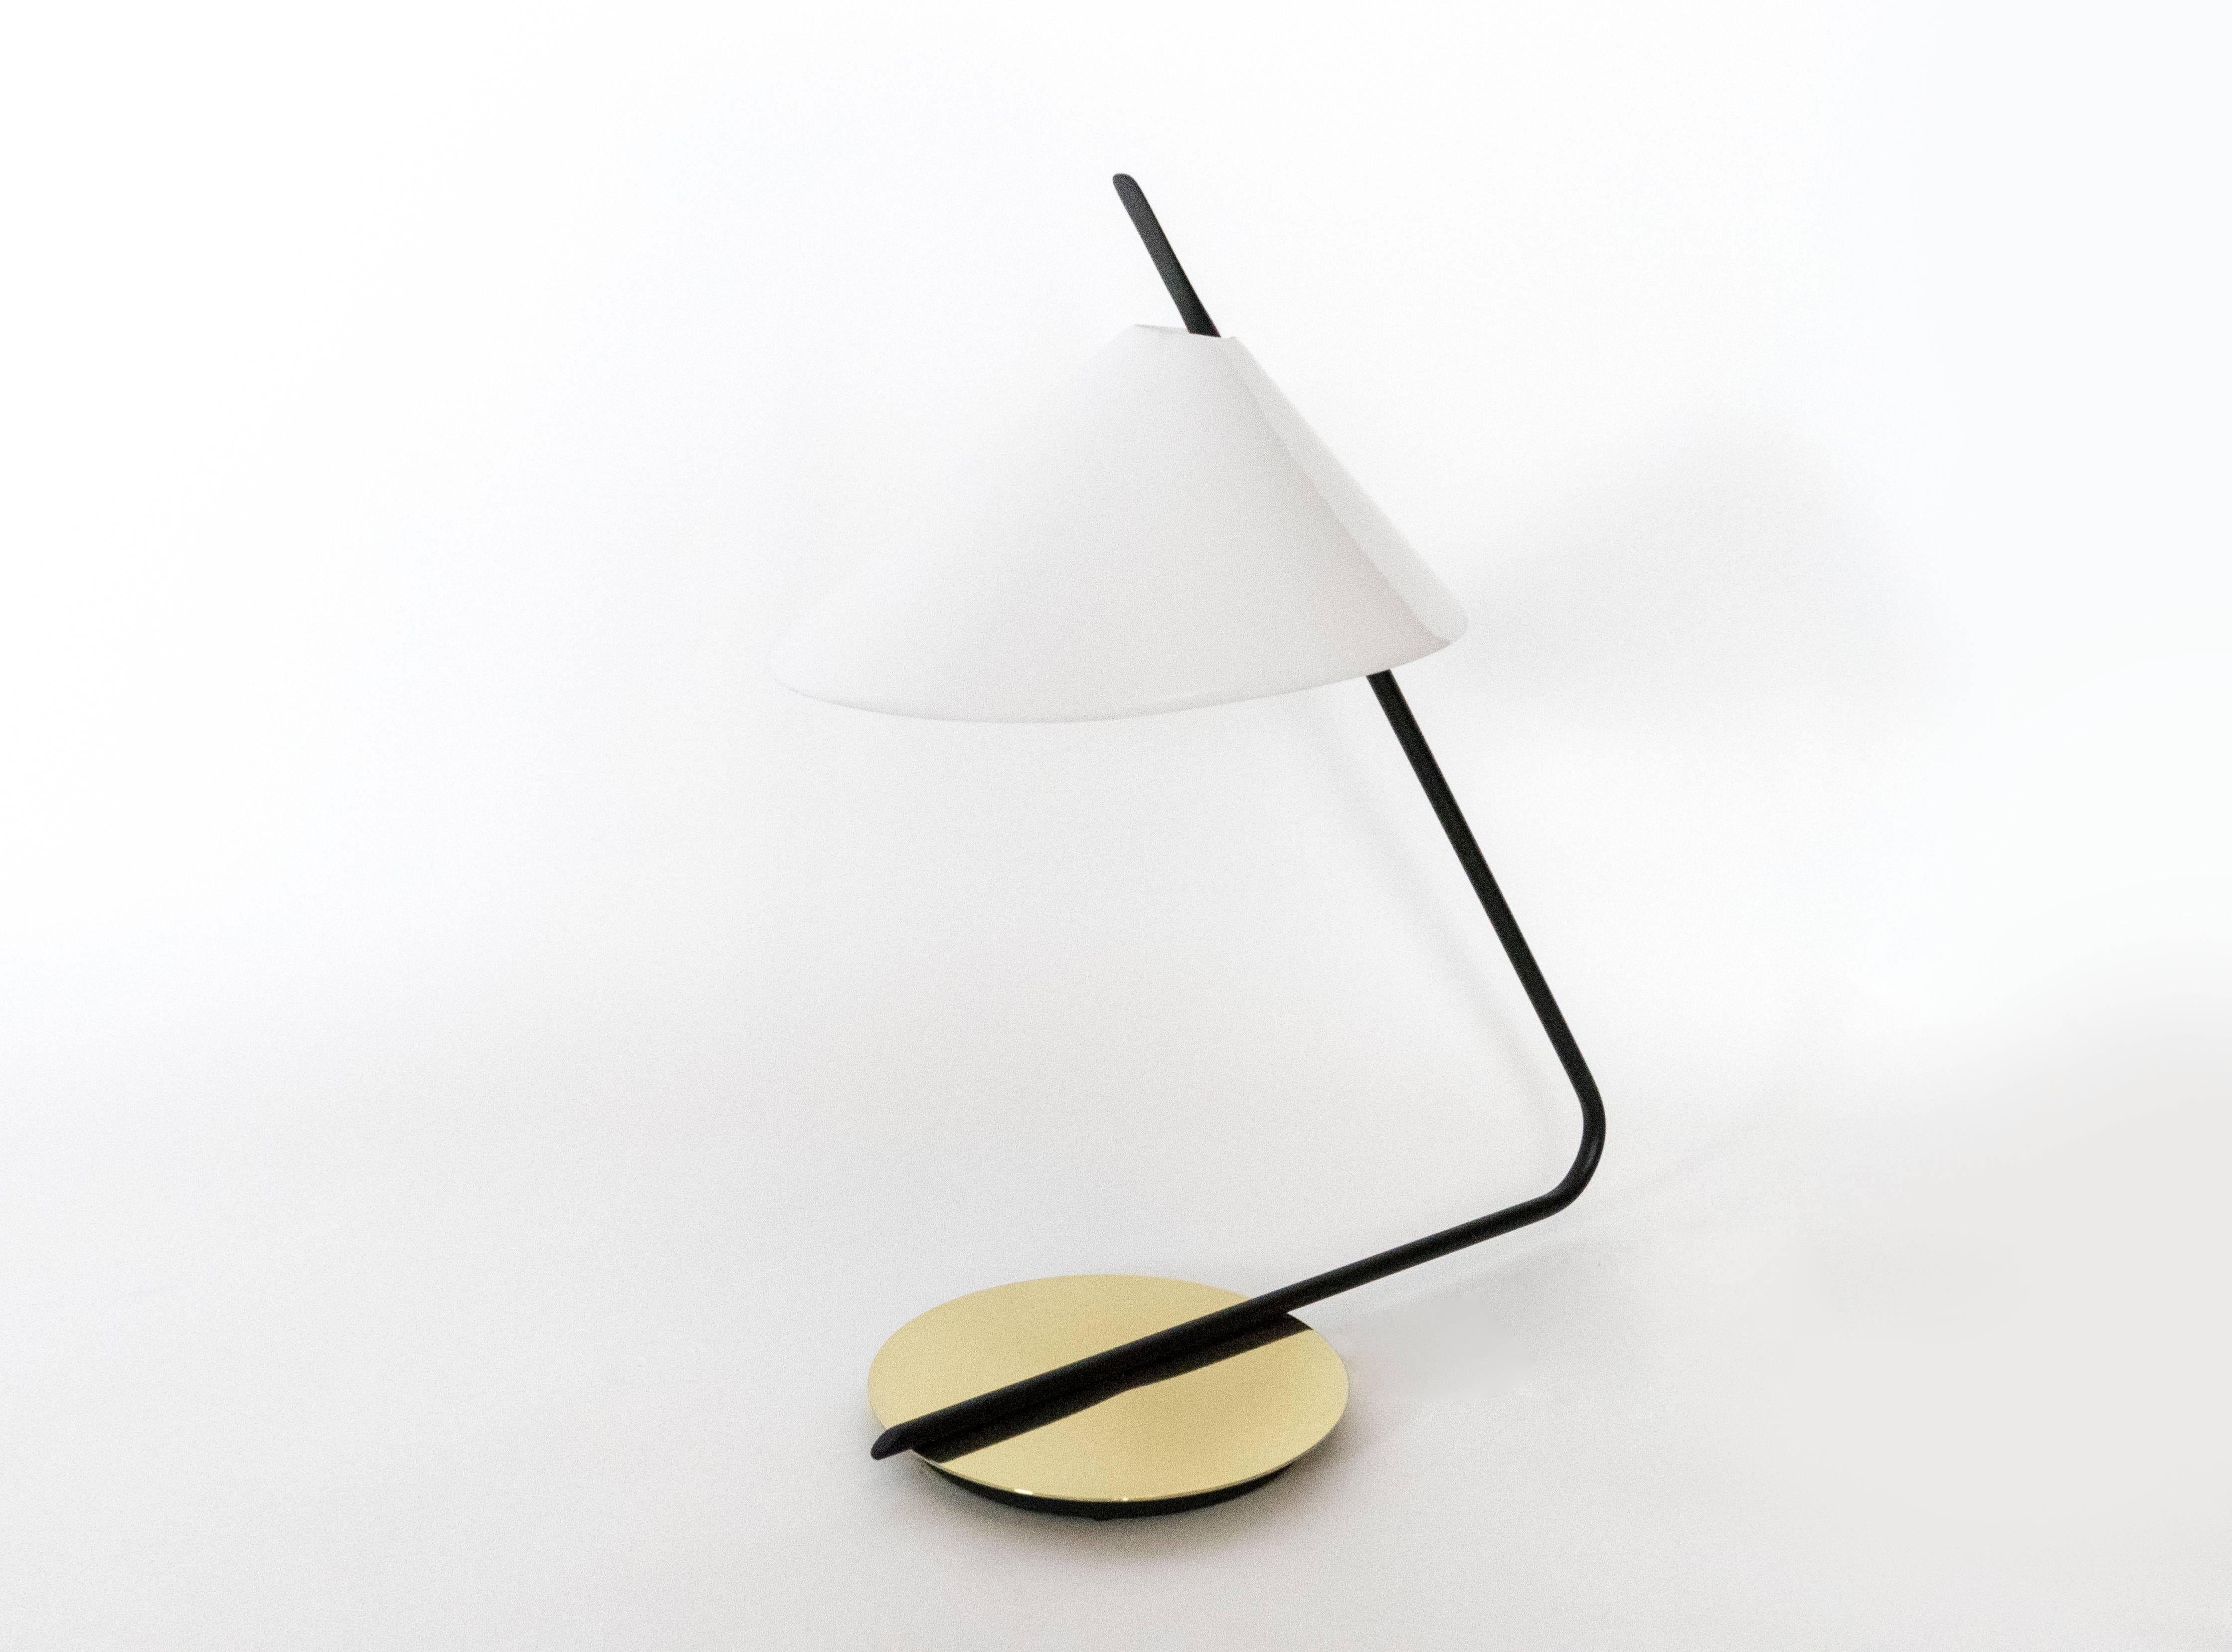 This lamp was scaled to work perfectly as a desk lamp, bedside lamps, or on an end tables. The soft light which is diffused by the acrylic shade is accented
by the reflection from the brass base.